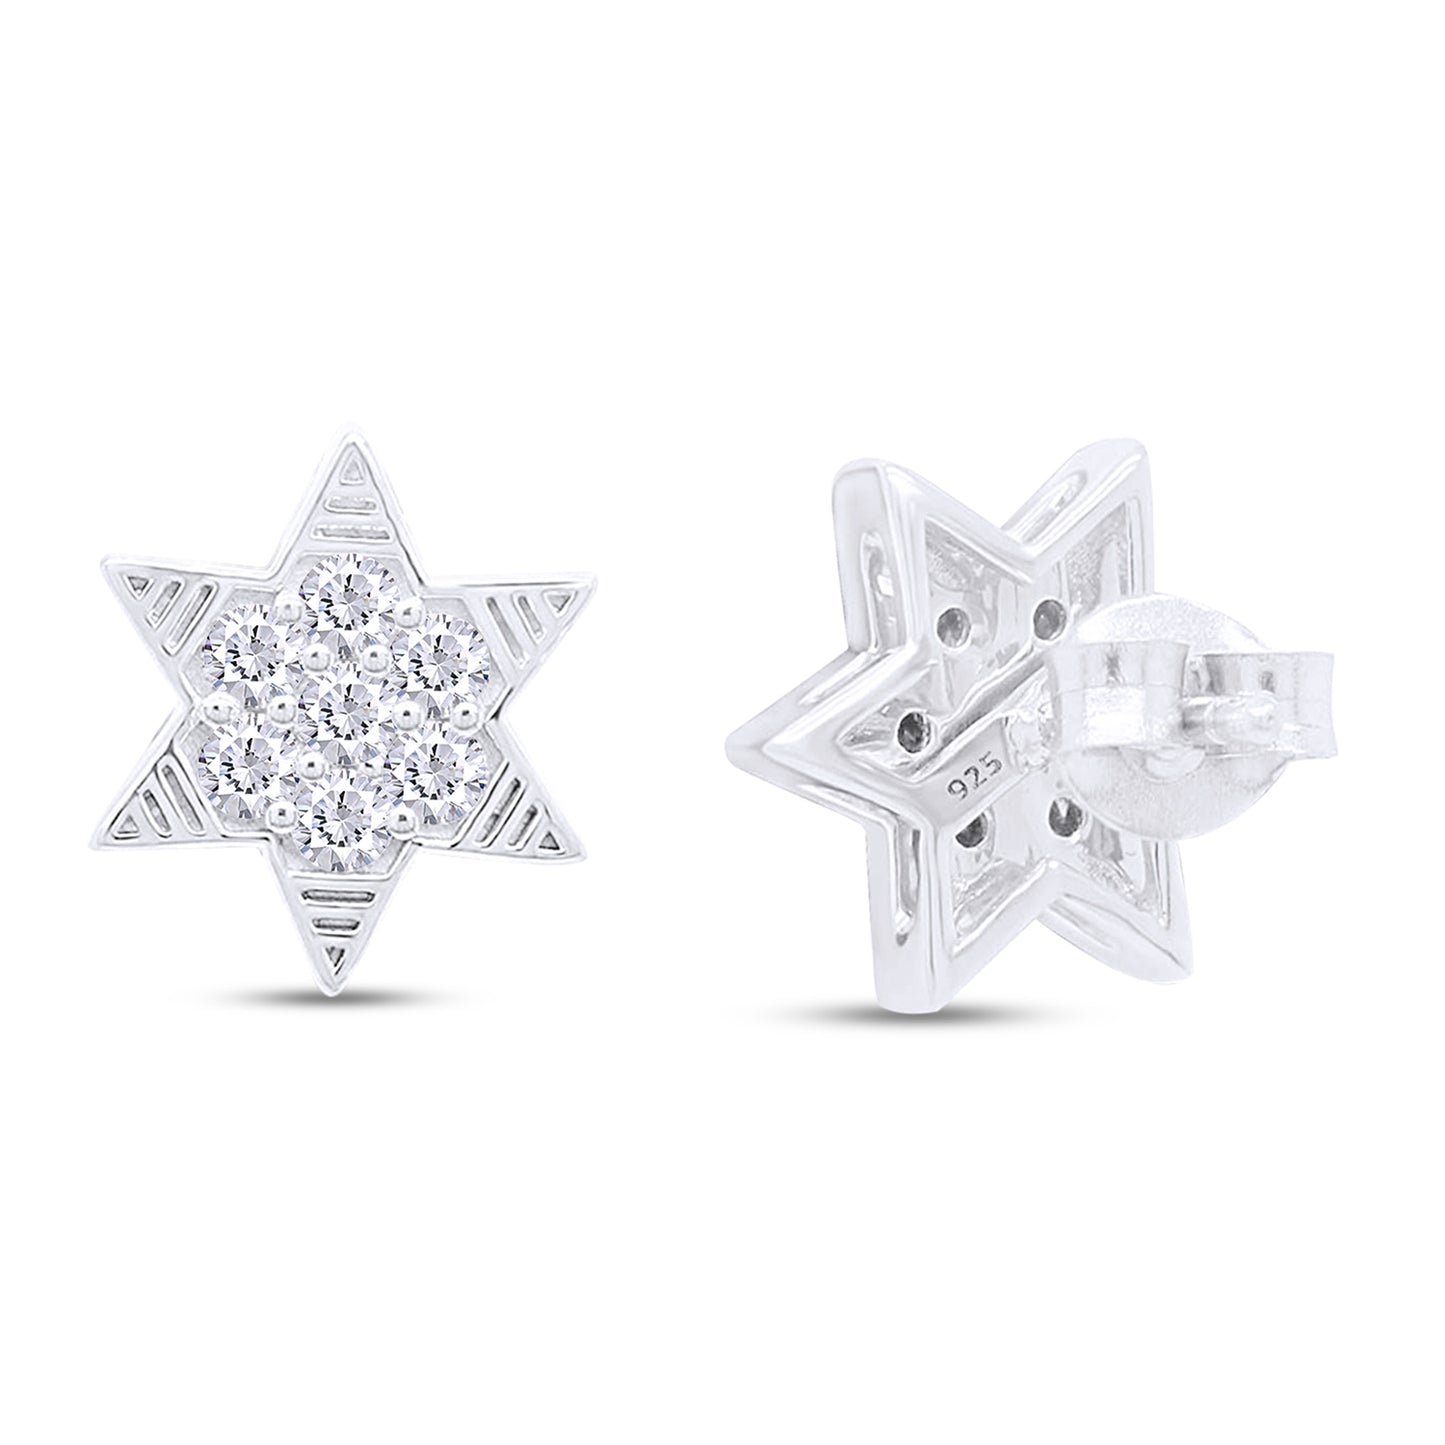 Load image into Gallery viewer, Round Cut Simulated White Topaz Star Stud Earrings in 925 Sterling Silver Jewelry for Women
